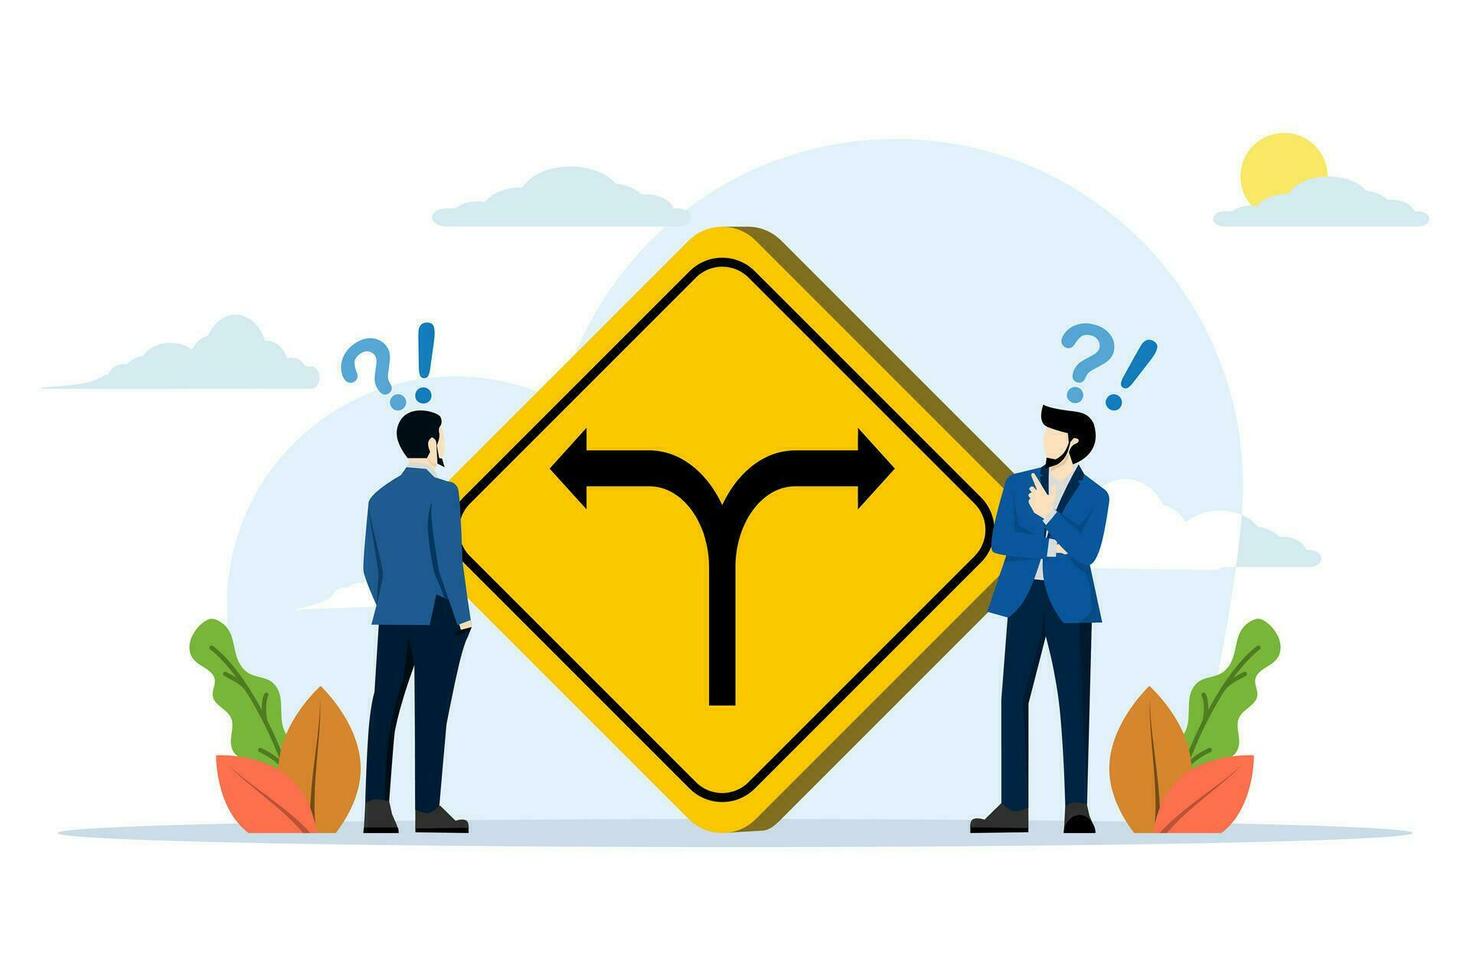 Concept of decision to choose a path, alternative or choice, deciding career path, thinking to find a solution, contemplation of businessman thinking about where to go on a people's road sign. vector